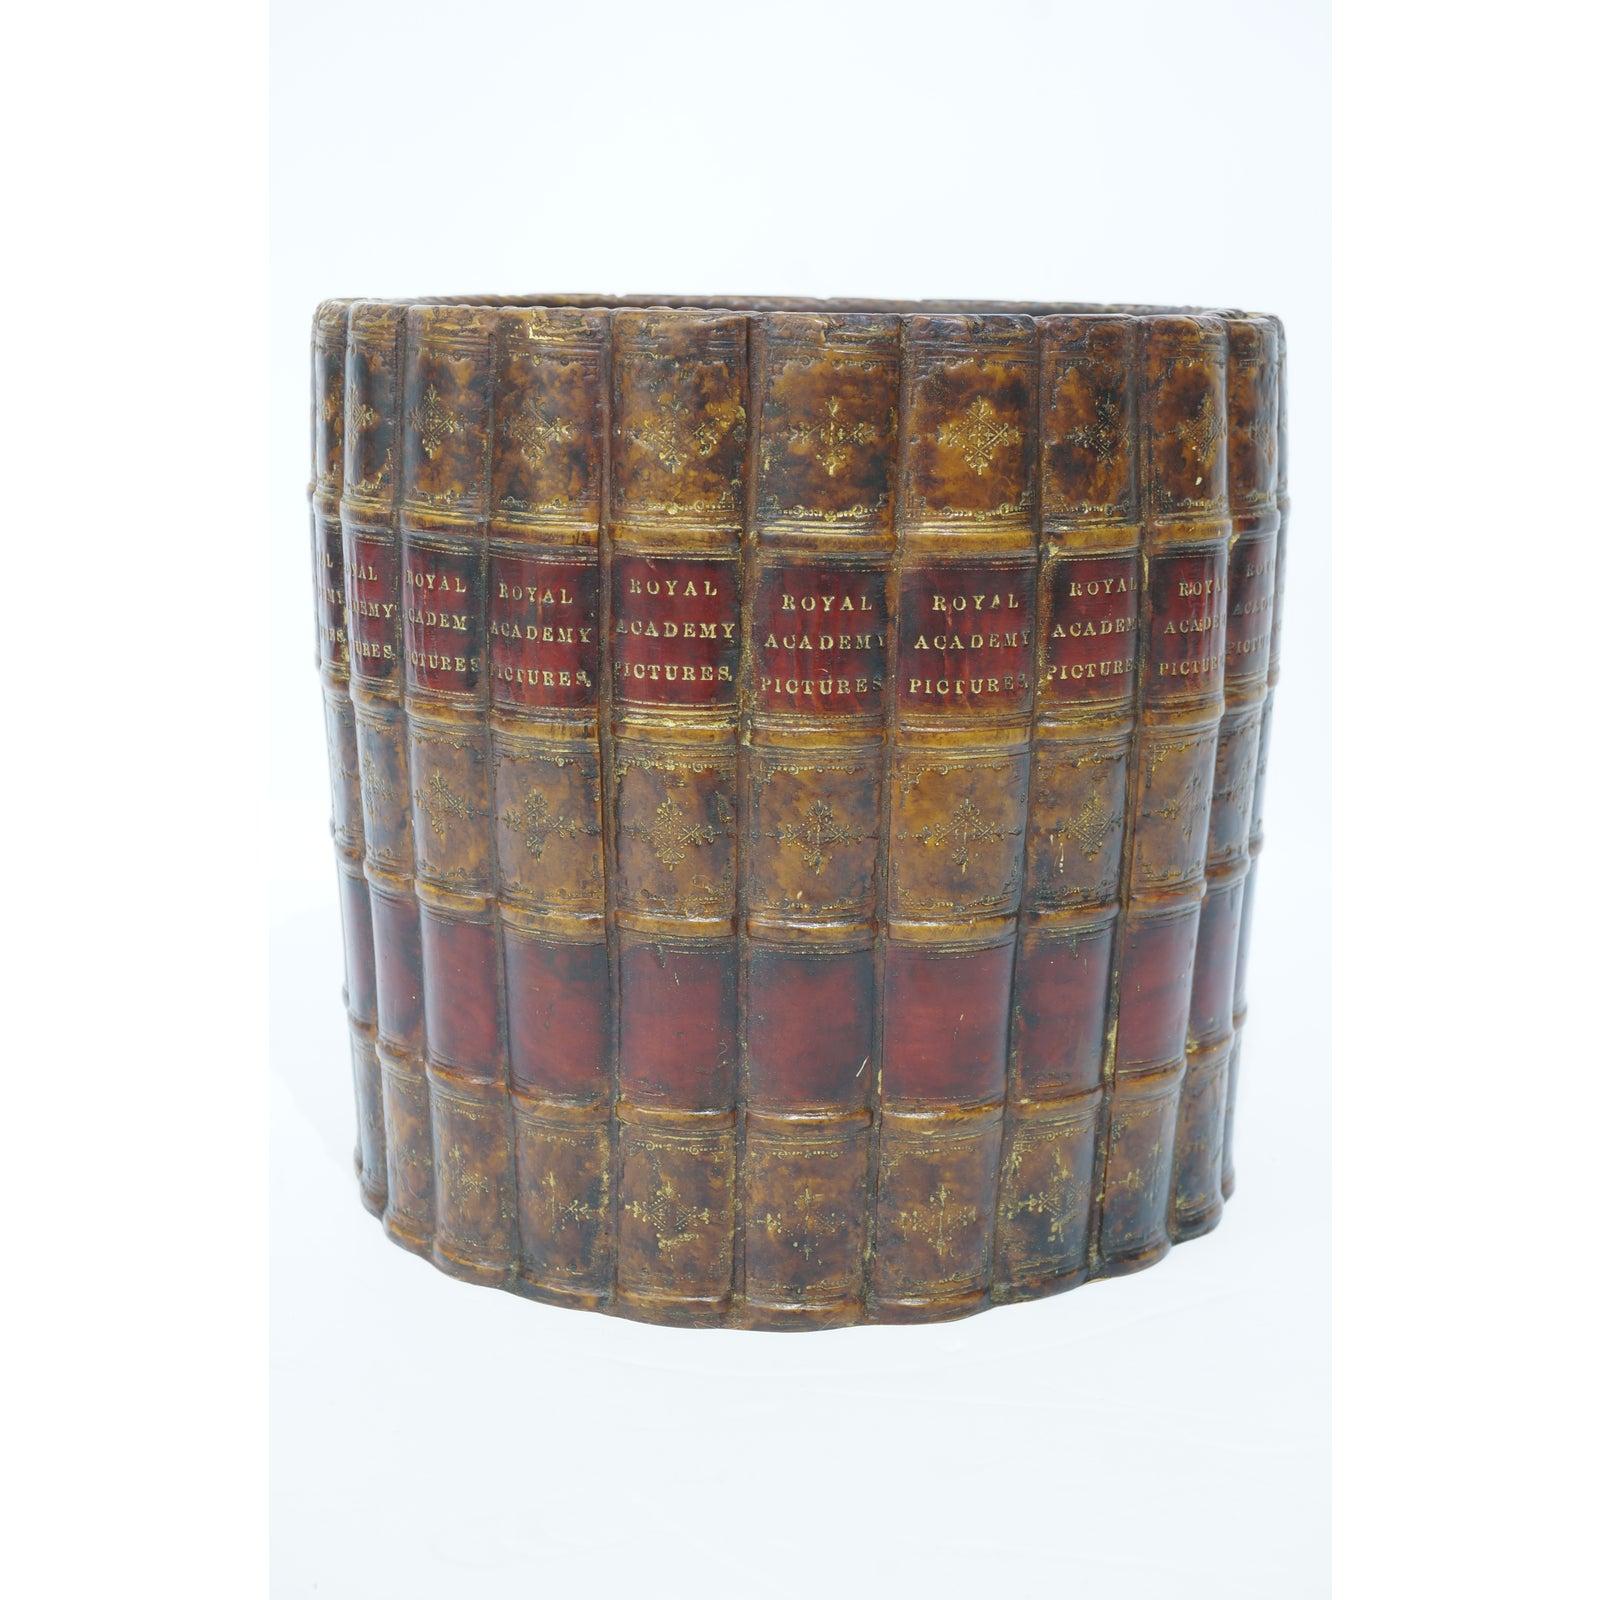 This stylish Edwardian inspired waste basket with its faux book spines are titled 